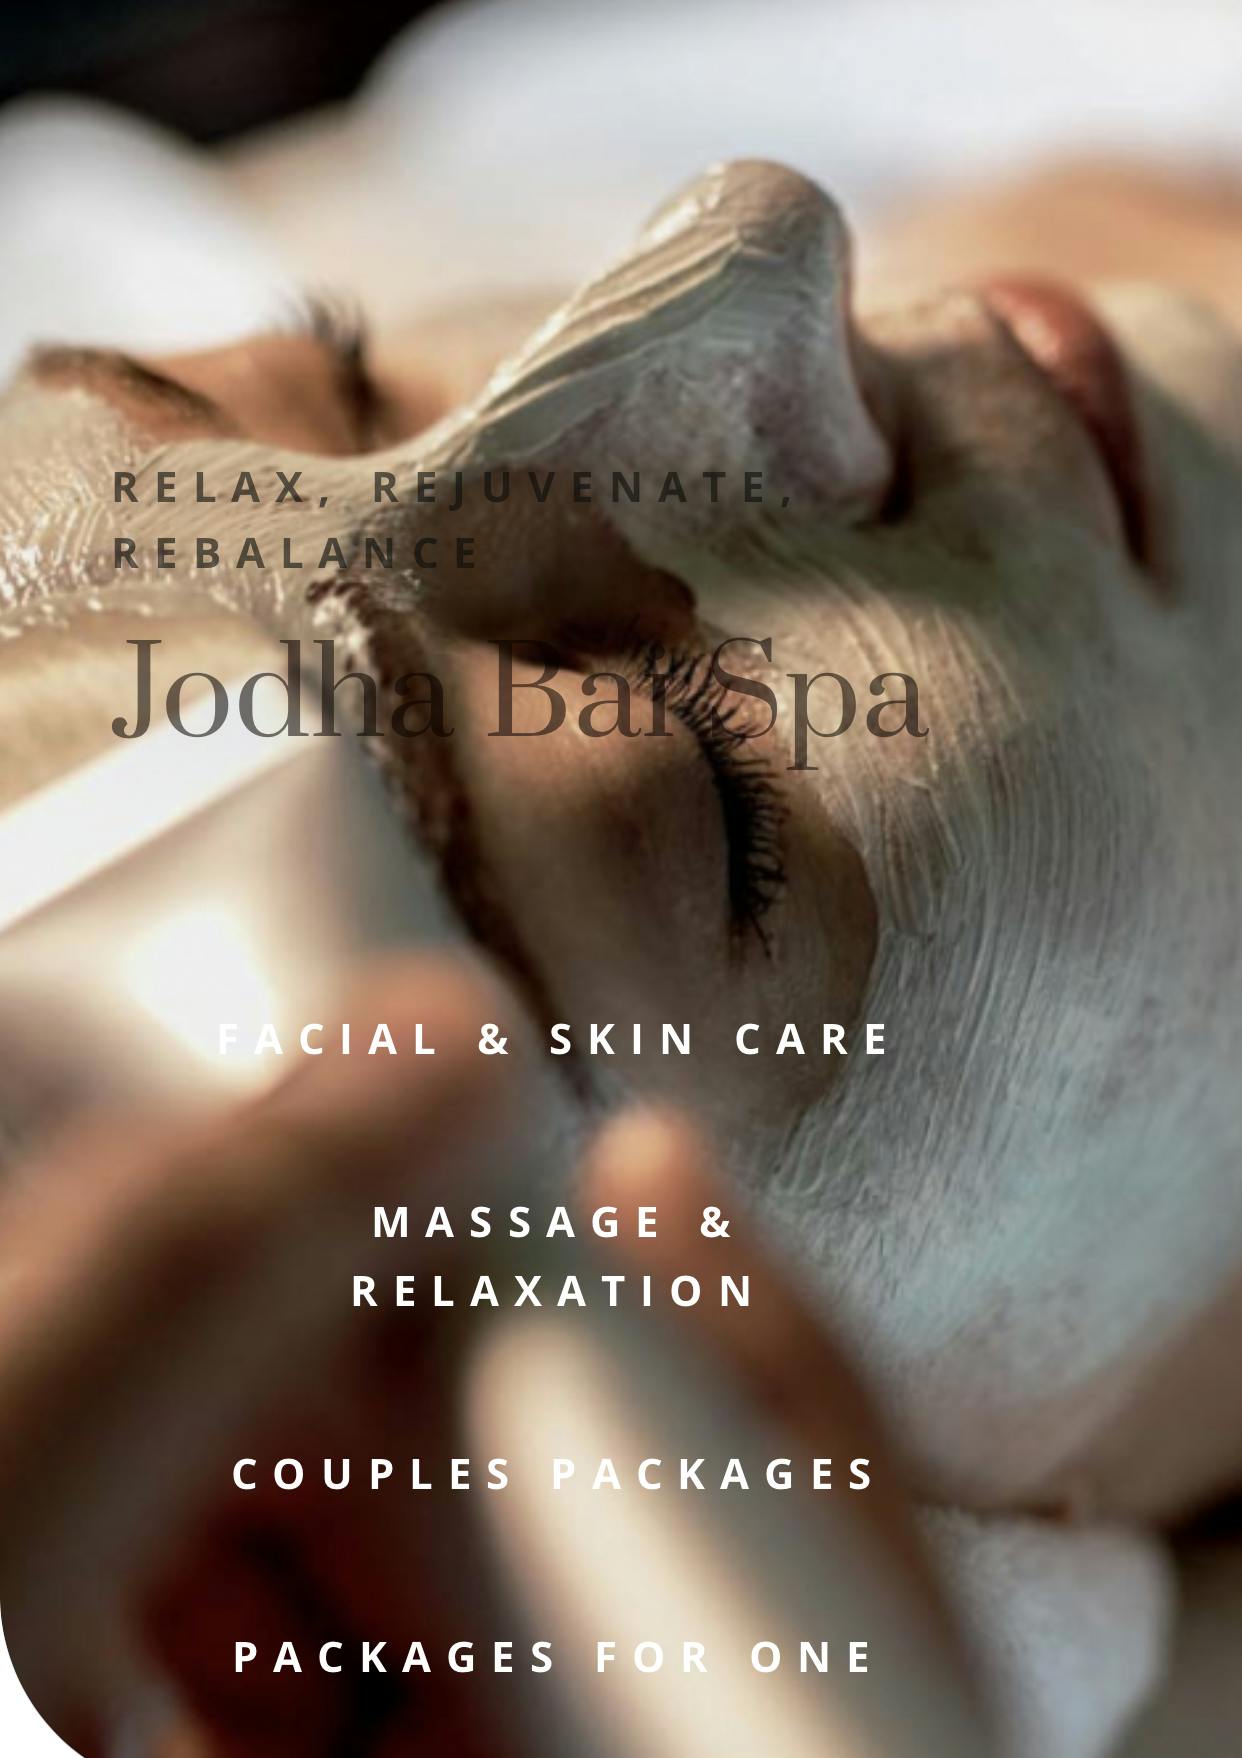 Pick from our Spa menu and get pampered in your room or on your deck by our professional masseuse and beauty therapists